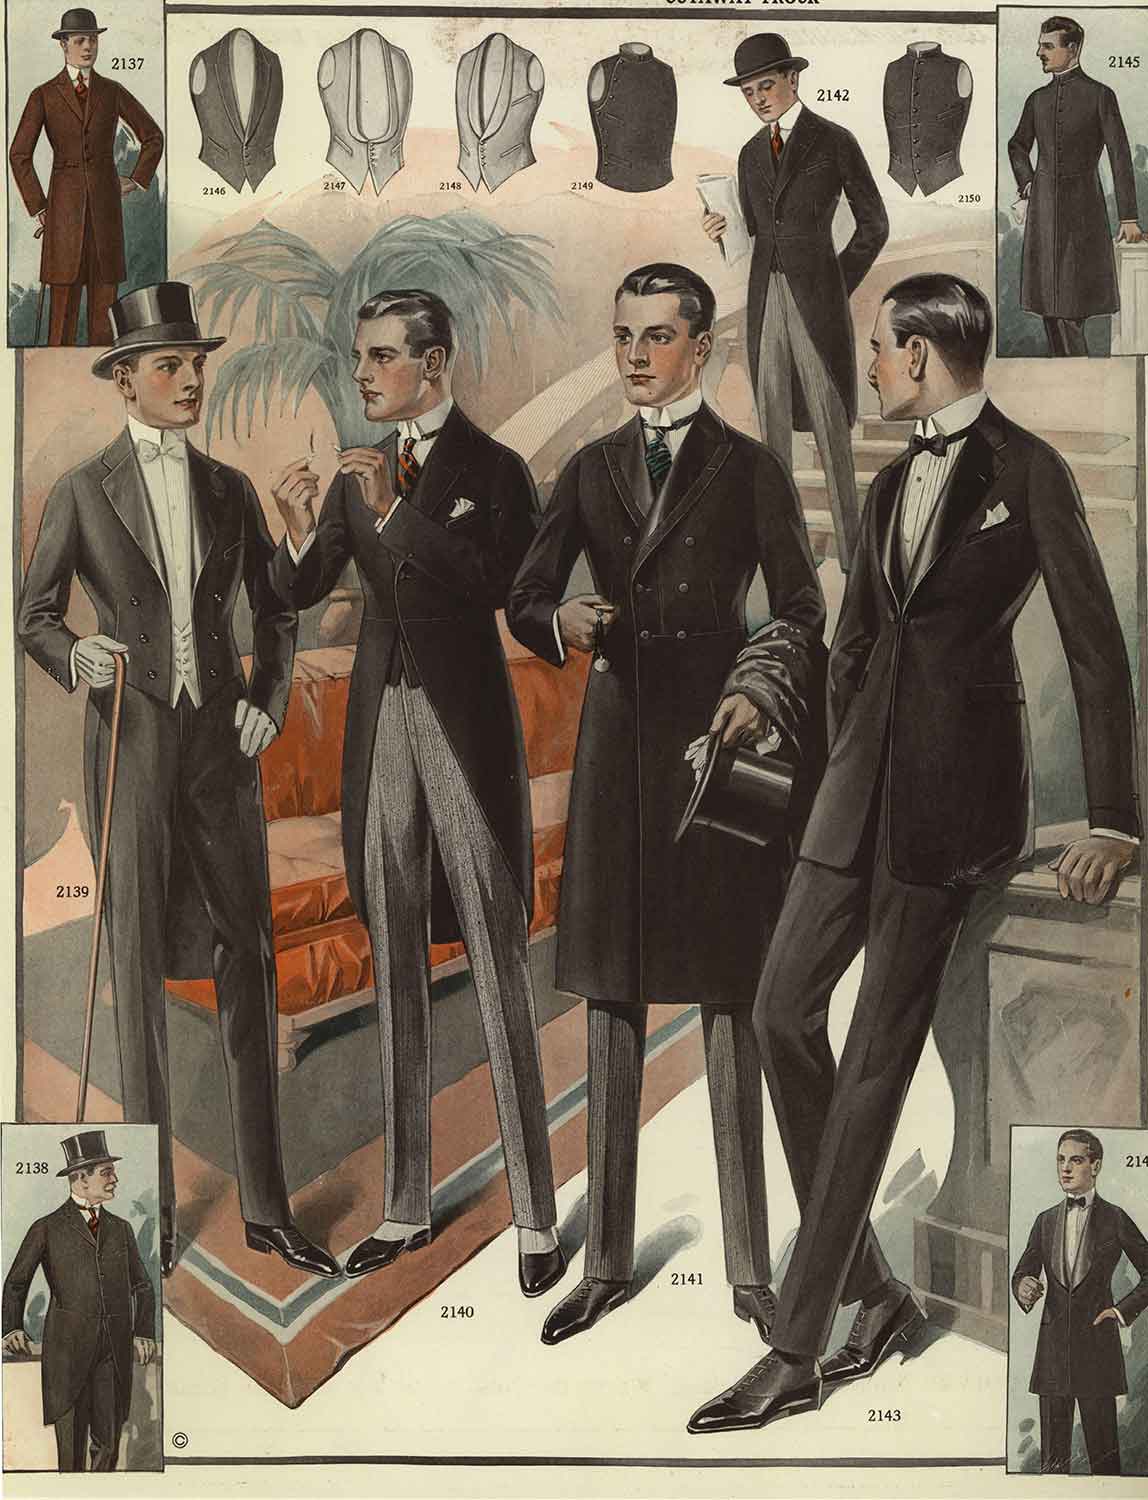 Men in the 1920s wearing morning dress, black tie, and top hats